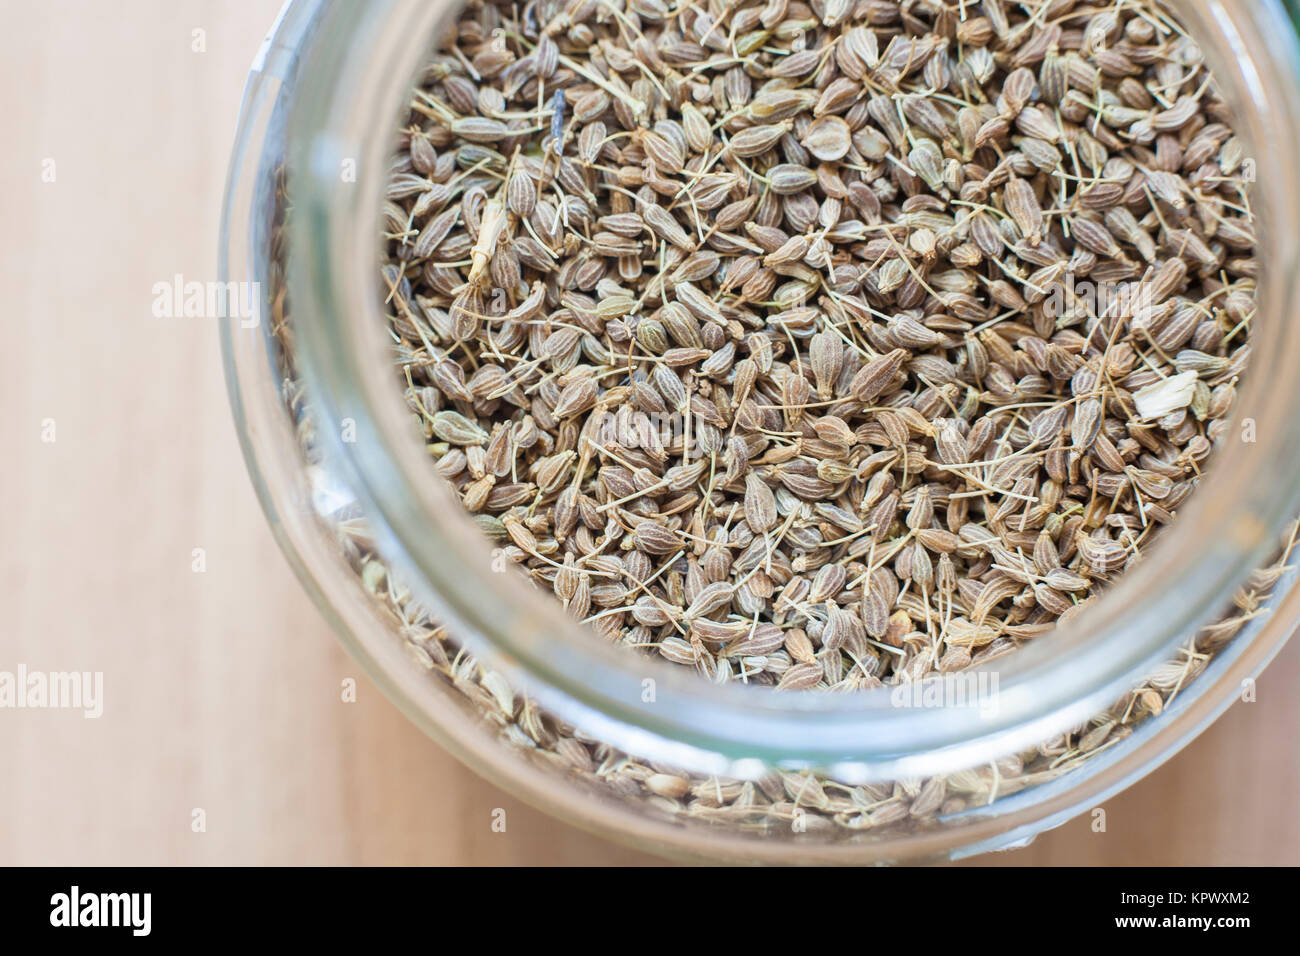 Glass jar with aniseed grains Stock Photo